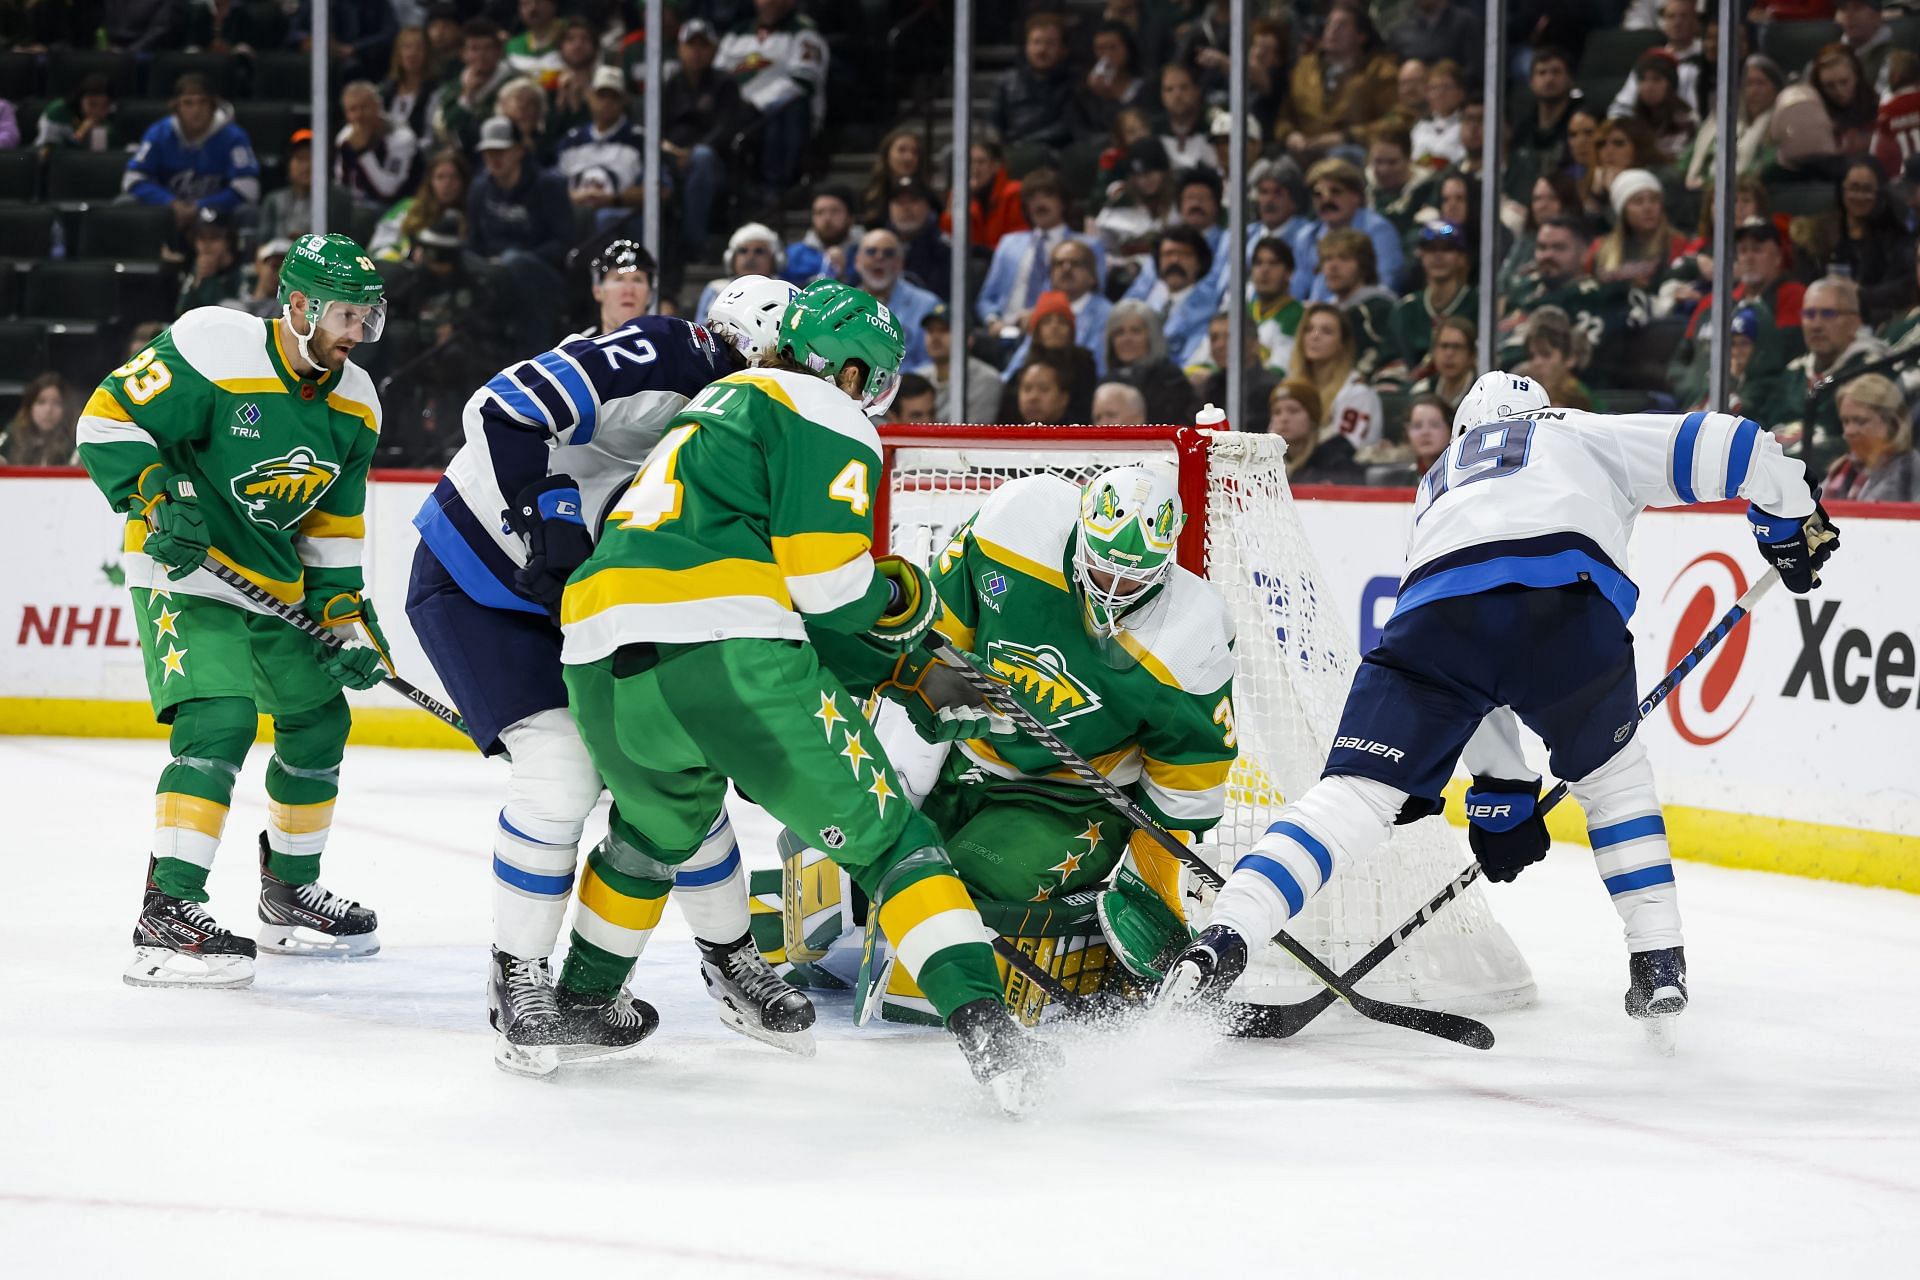 Minnesota Wild v Winnipeg Jets Live streaming options, how and where to watch NHL live on TV, channel list, and more